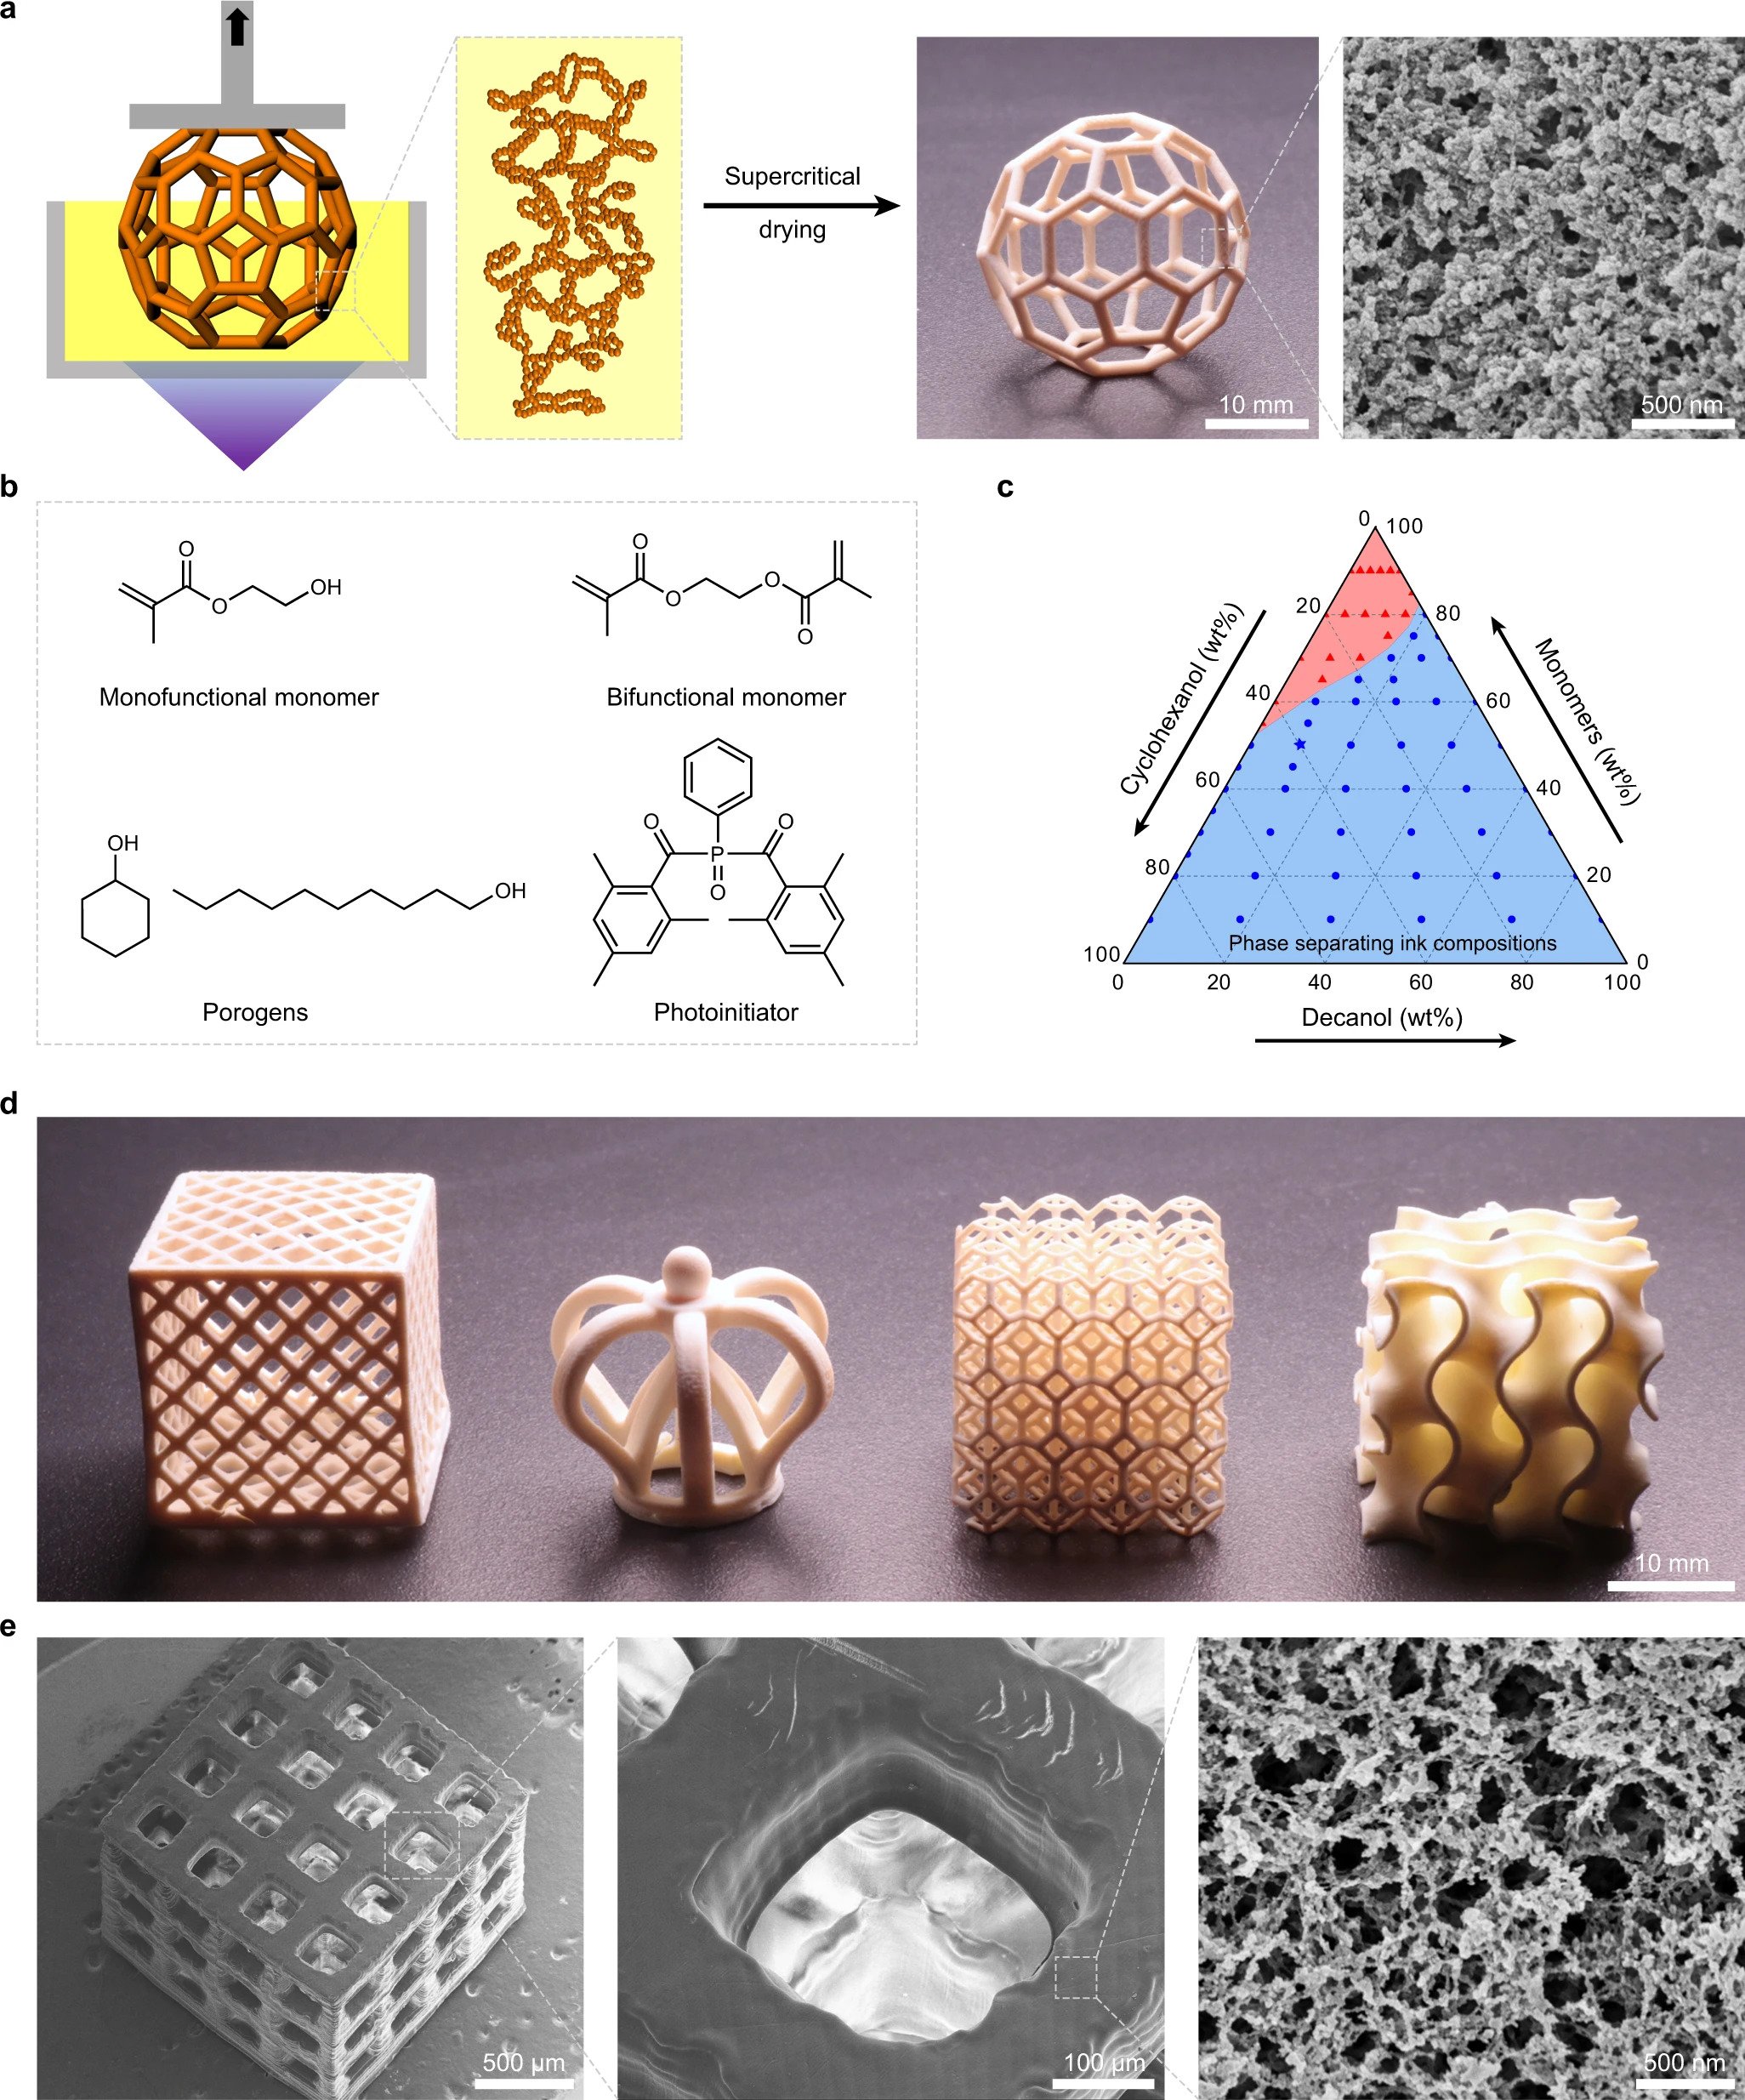 3D Printing of polymer objects with complex macroscopic 3D geometry and defined nanoporous structure. Image via KIT/Nature journal.